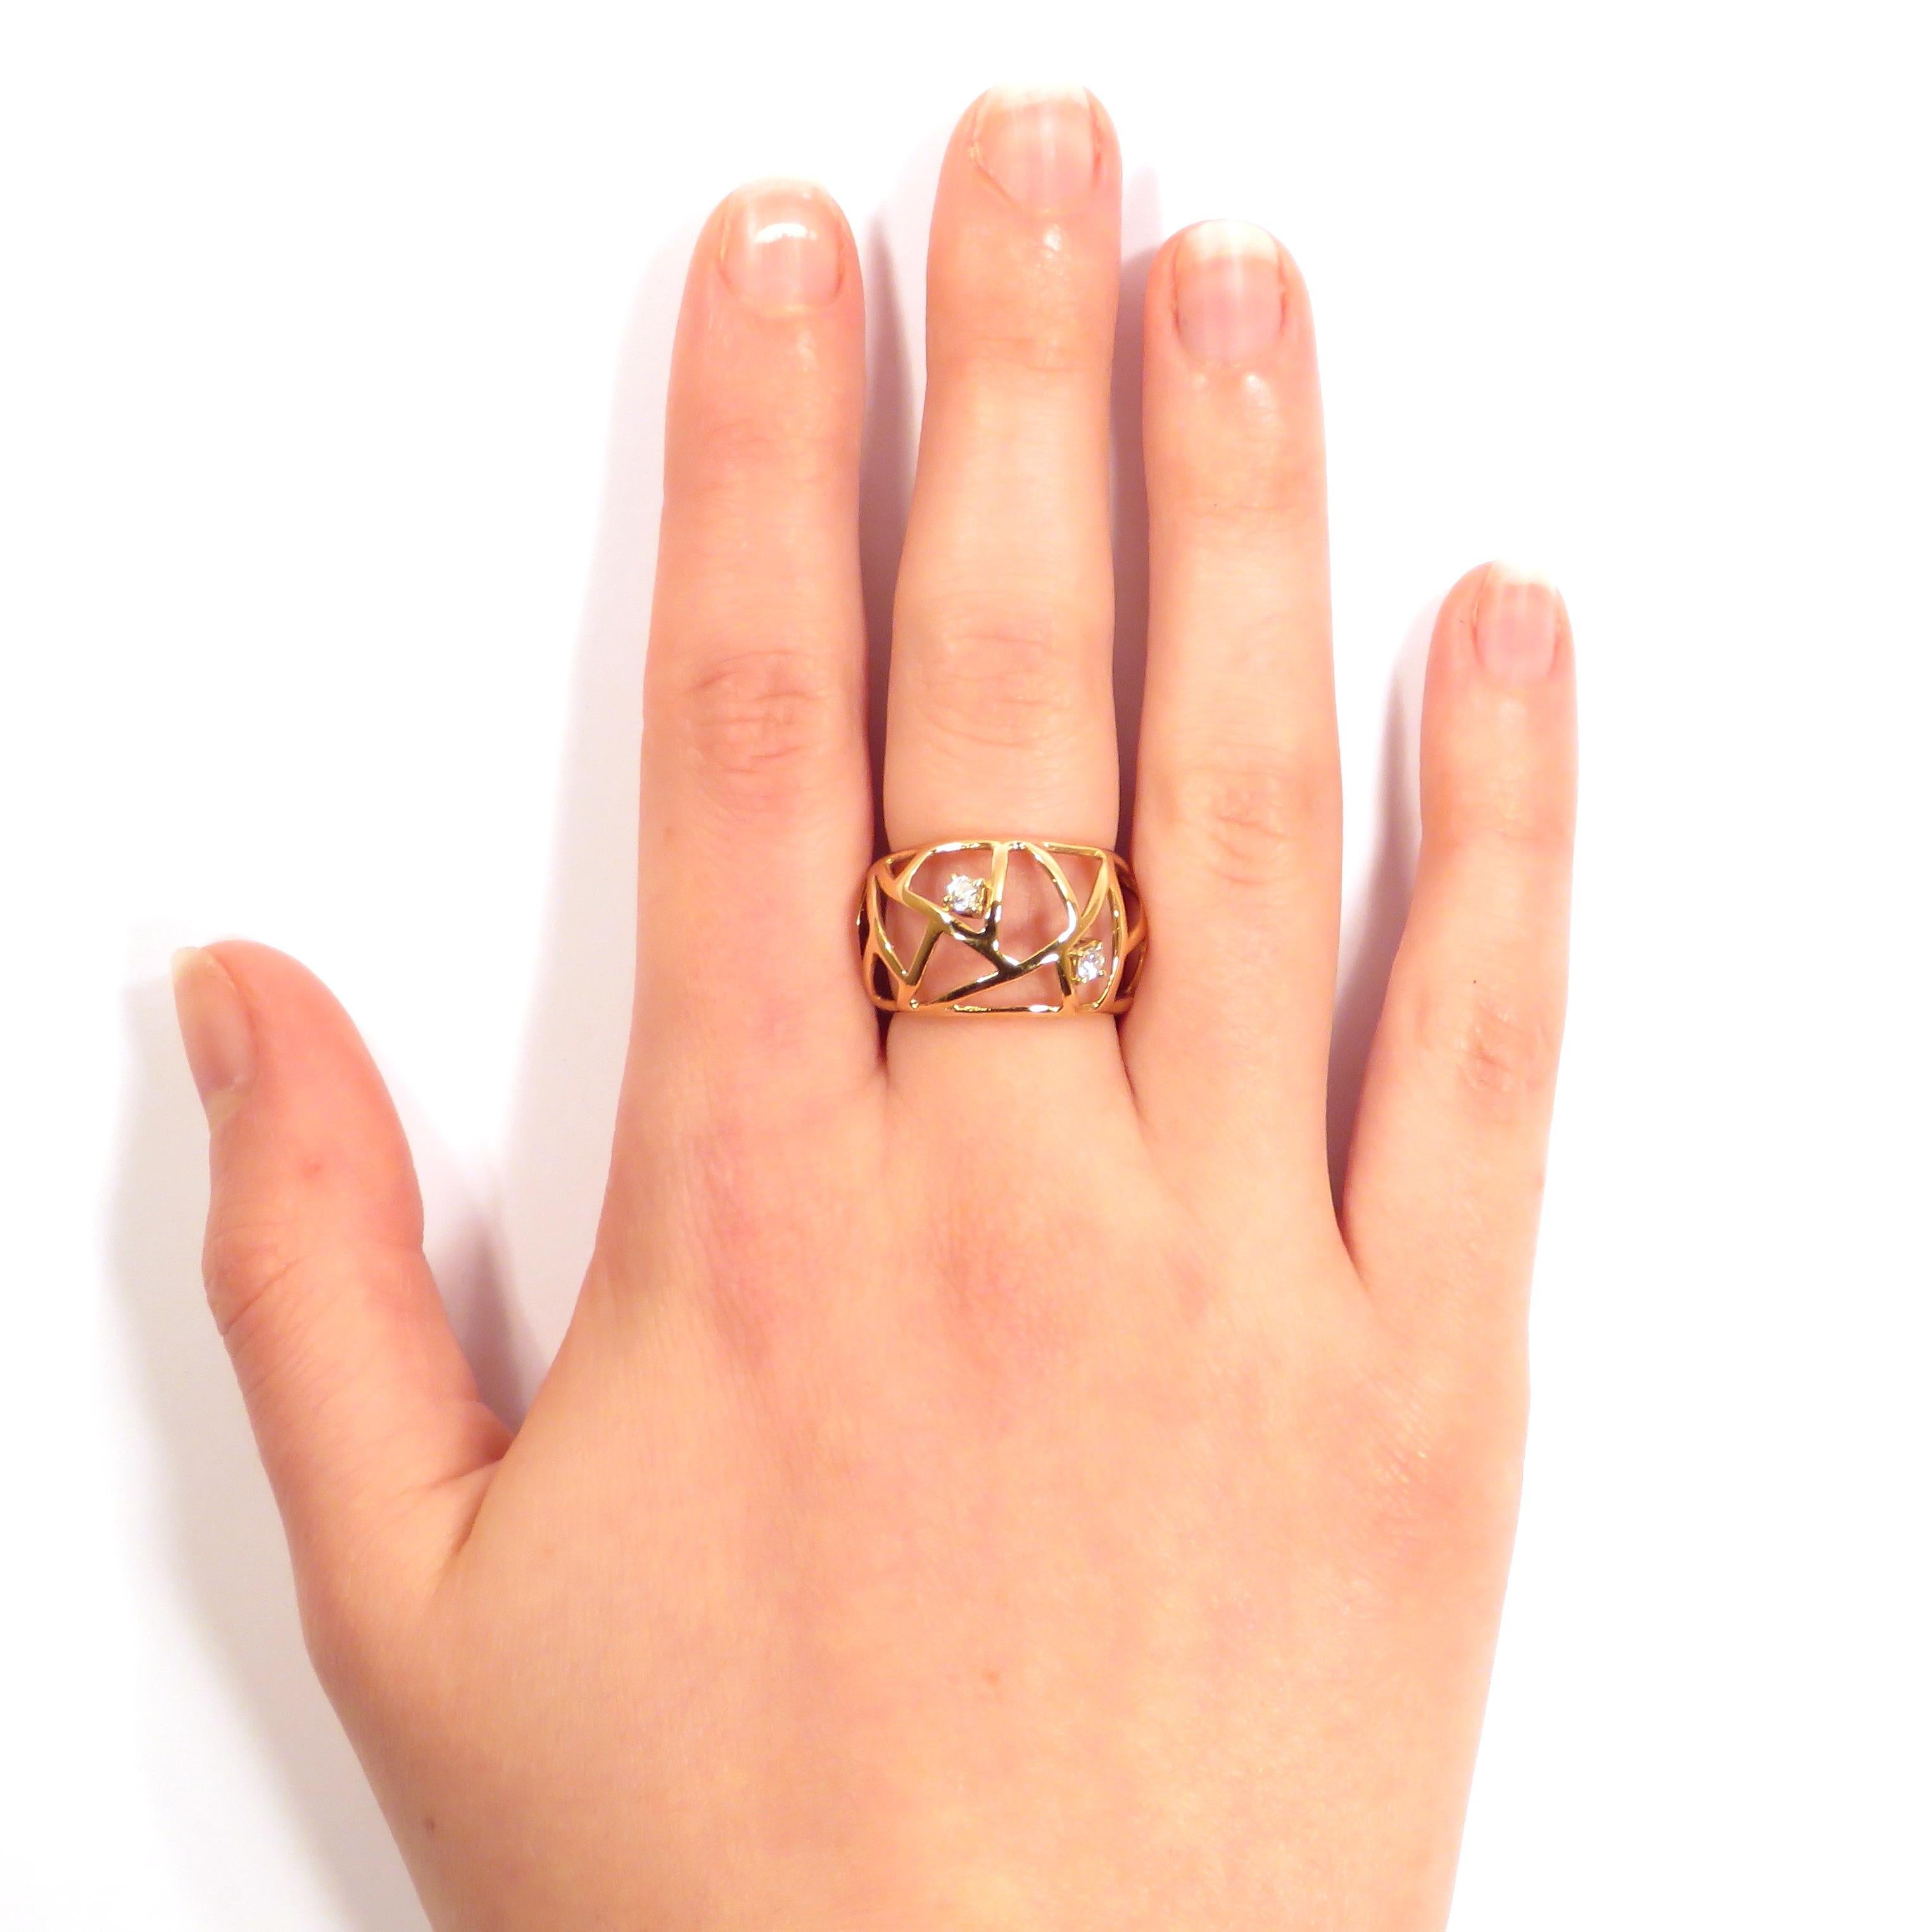 18 Karat Rose Gold Diamonds Ring Handcrafted in Italy by Botta Gioielli 1